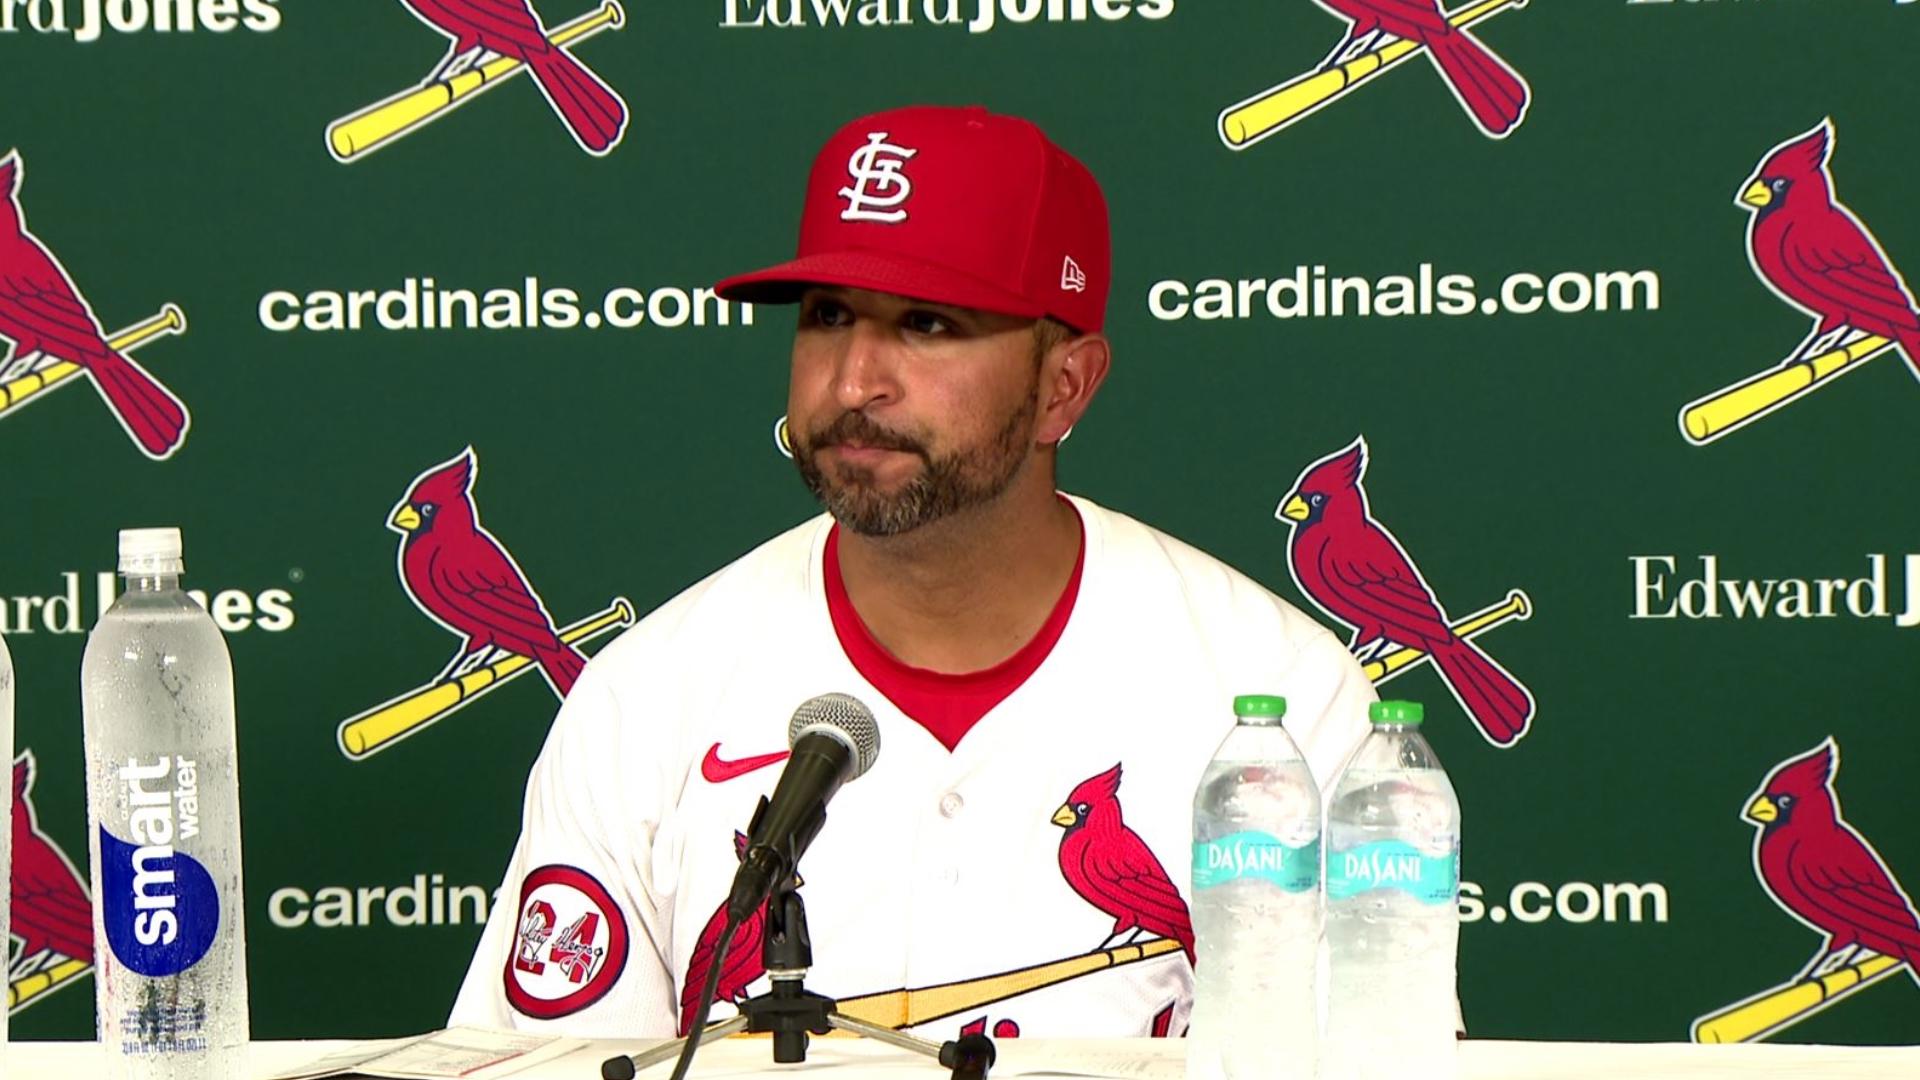 St. Louis Cardinals' manager Oli Marmol discusses the team's 6-2 loss against the Atlanta Braves. The game was the first of a doubleheader on Wednesday.